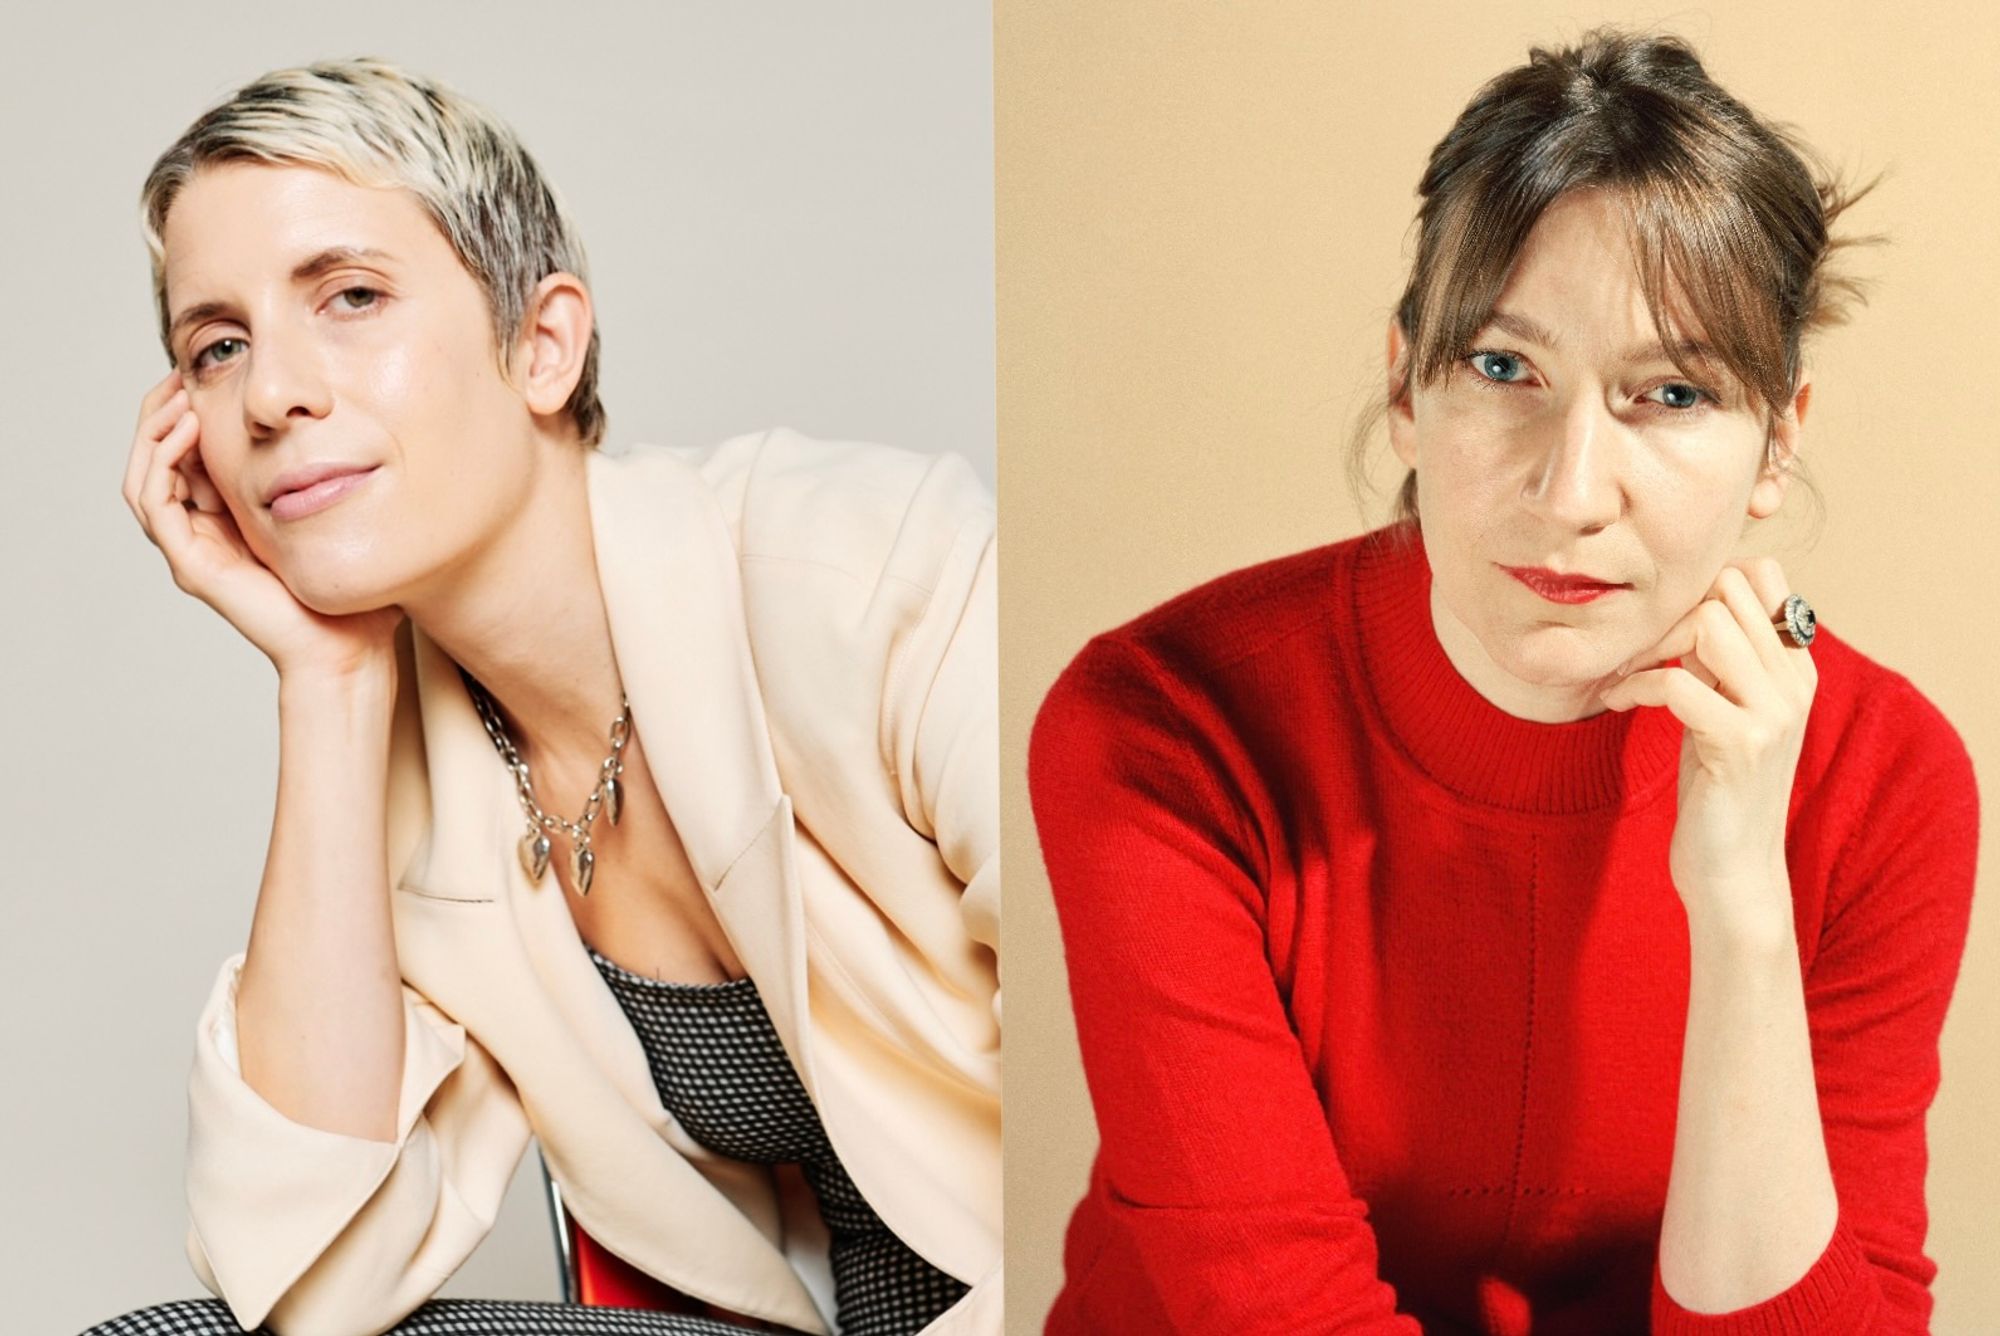 Claire Evans and Sheila Heti pose for side-by-side portraits.